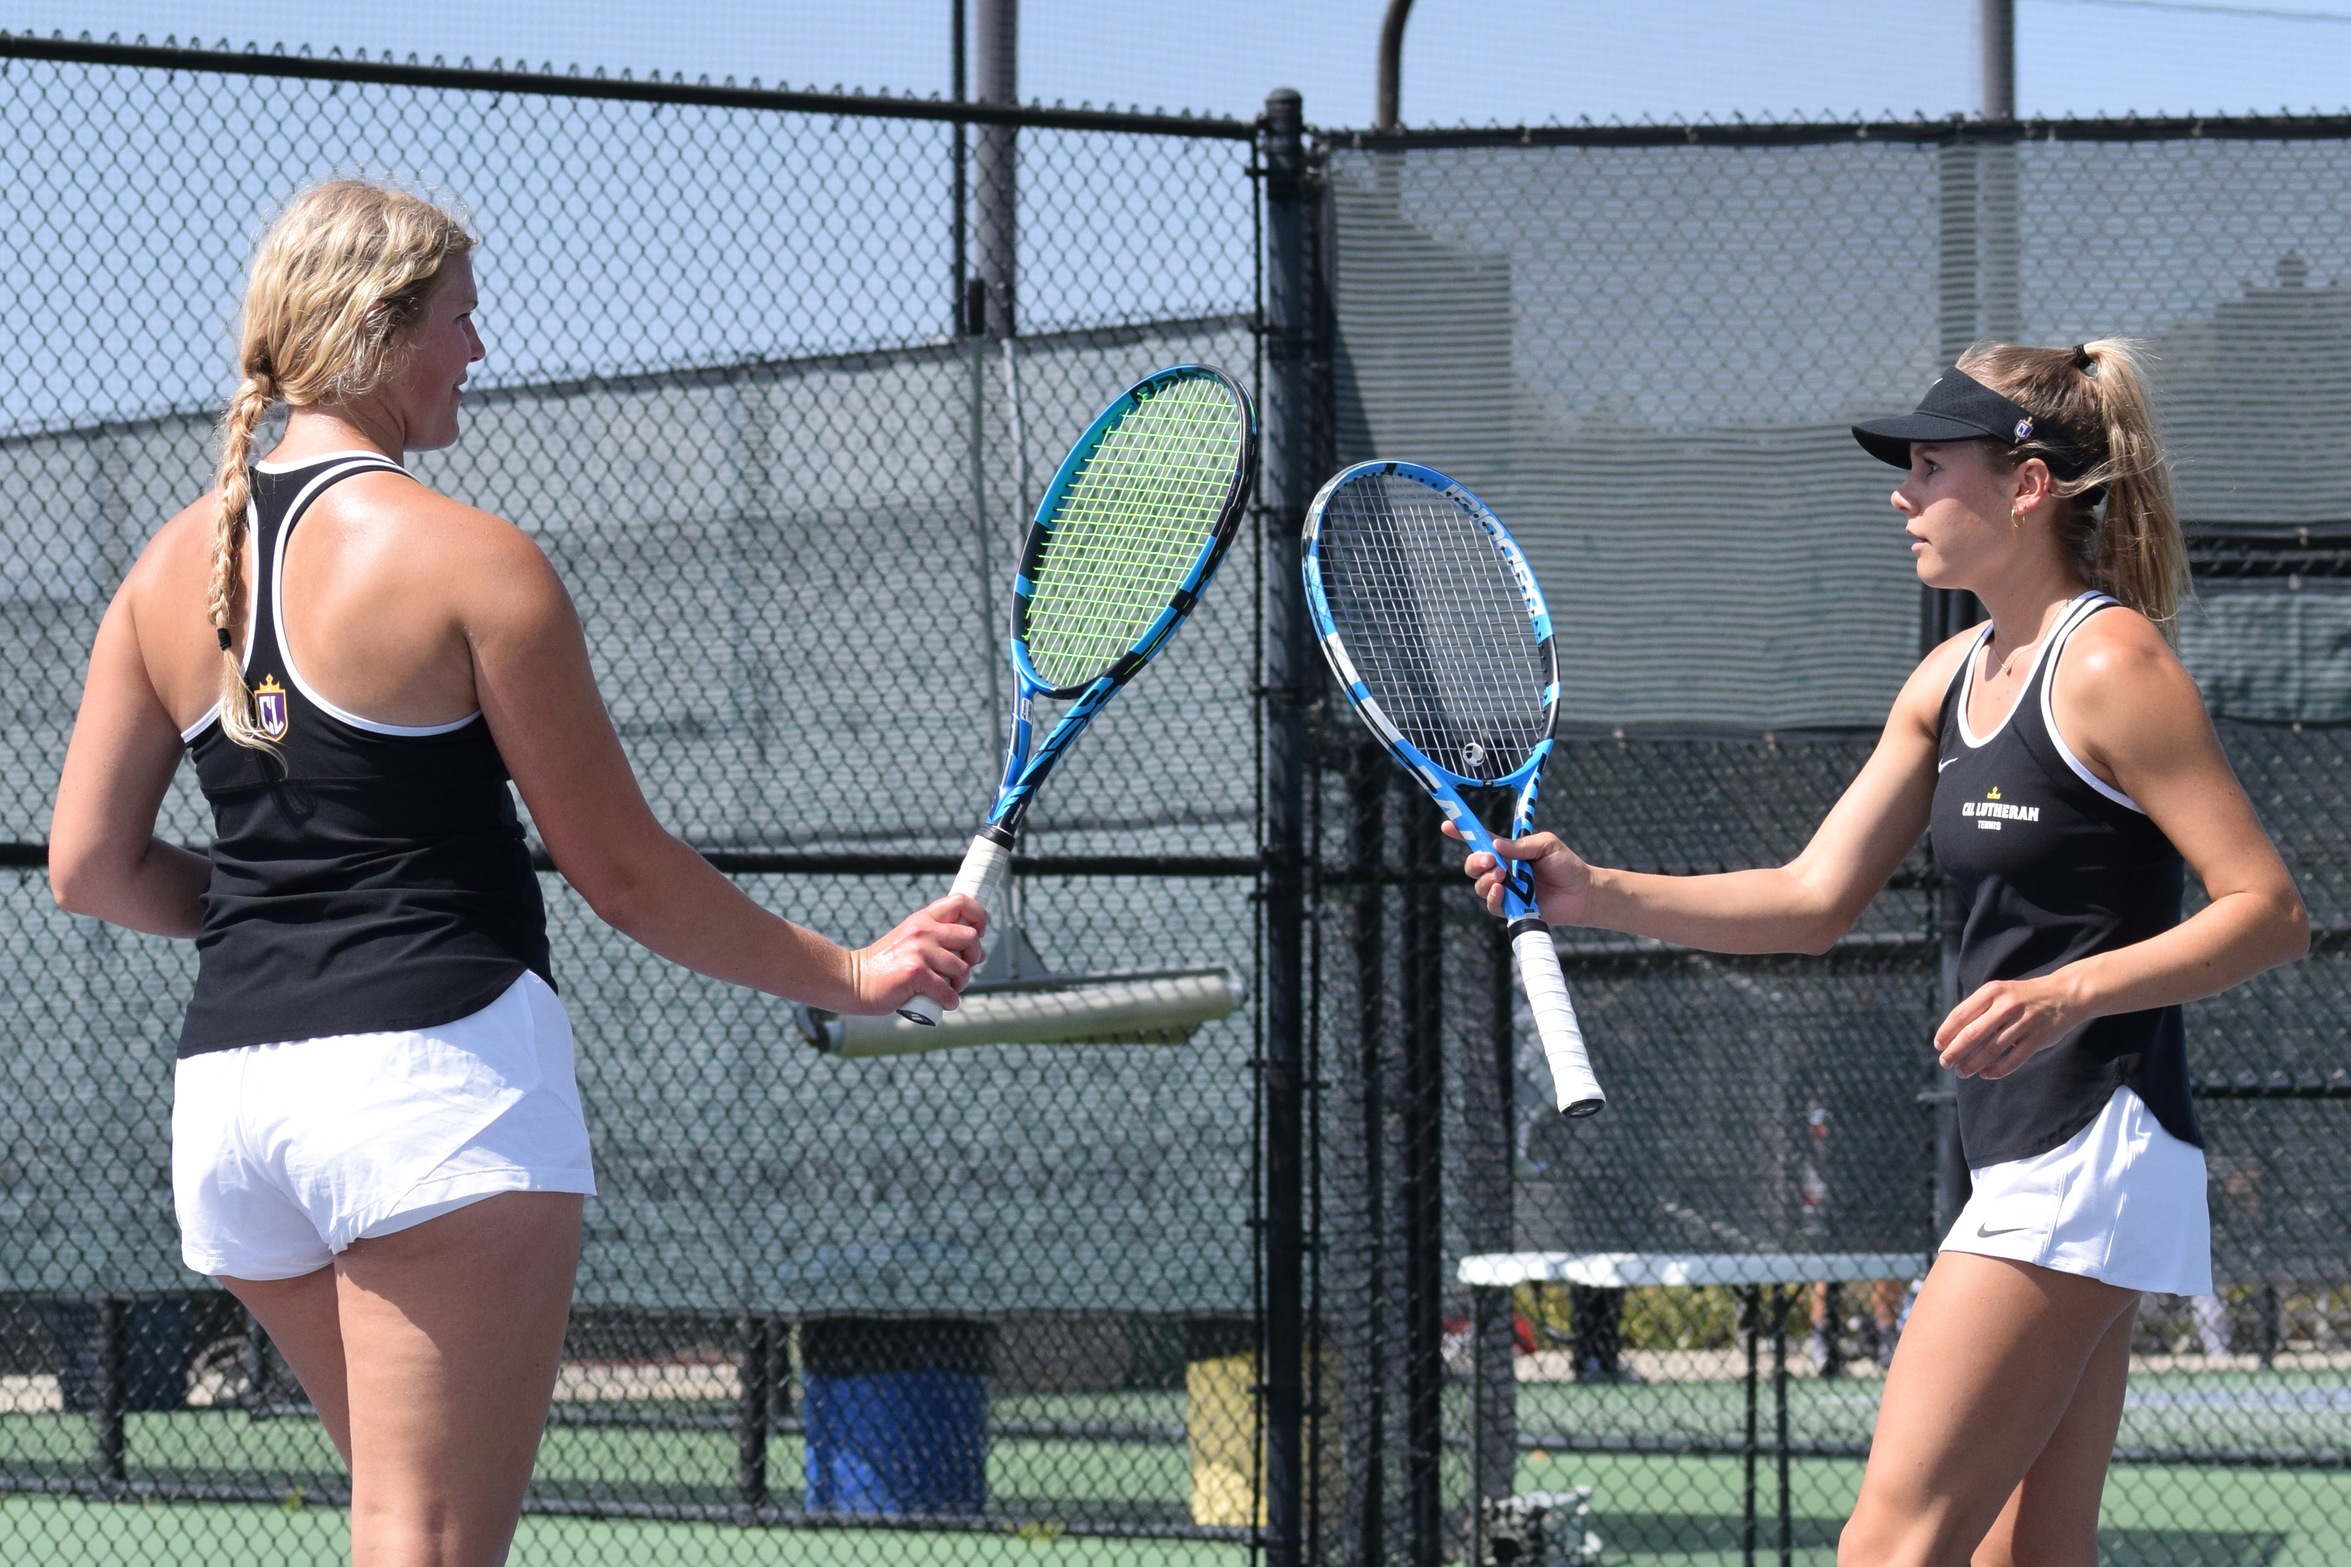 Joslin Seaberg (left) and Heidi Levanen (right) shut out their competition at the No. 2 doubles spot. (Photo: Trinity Martinez)